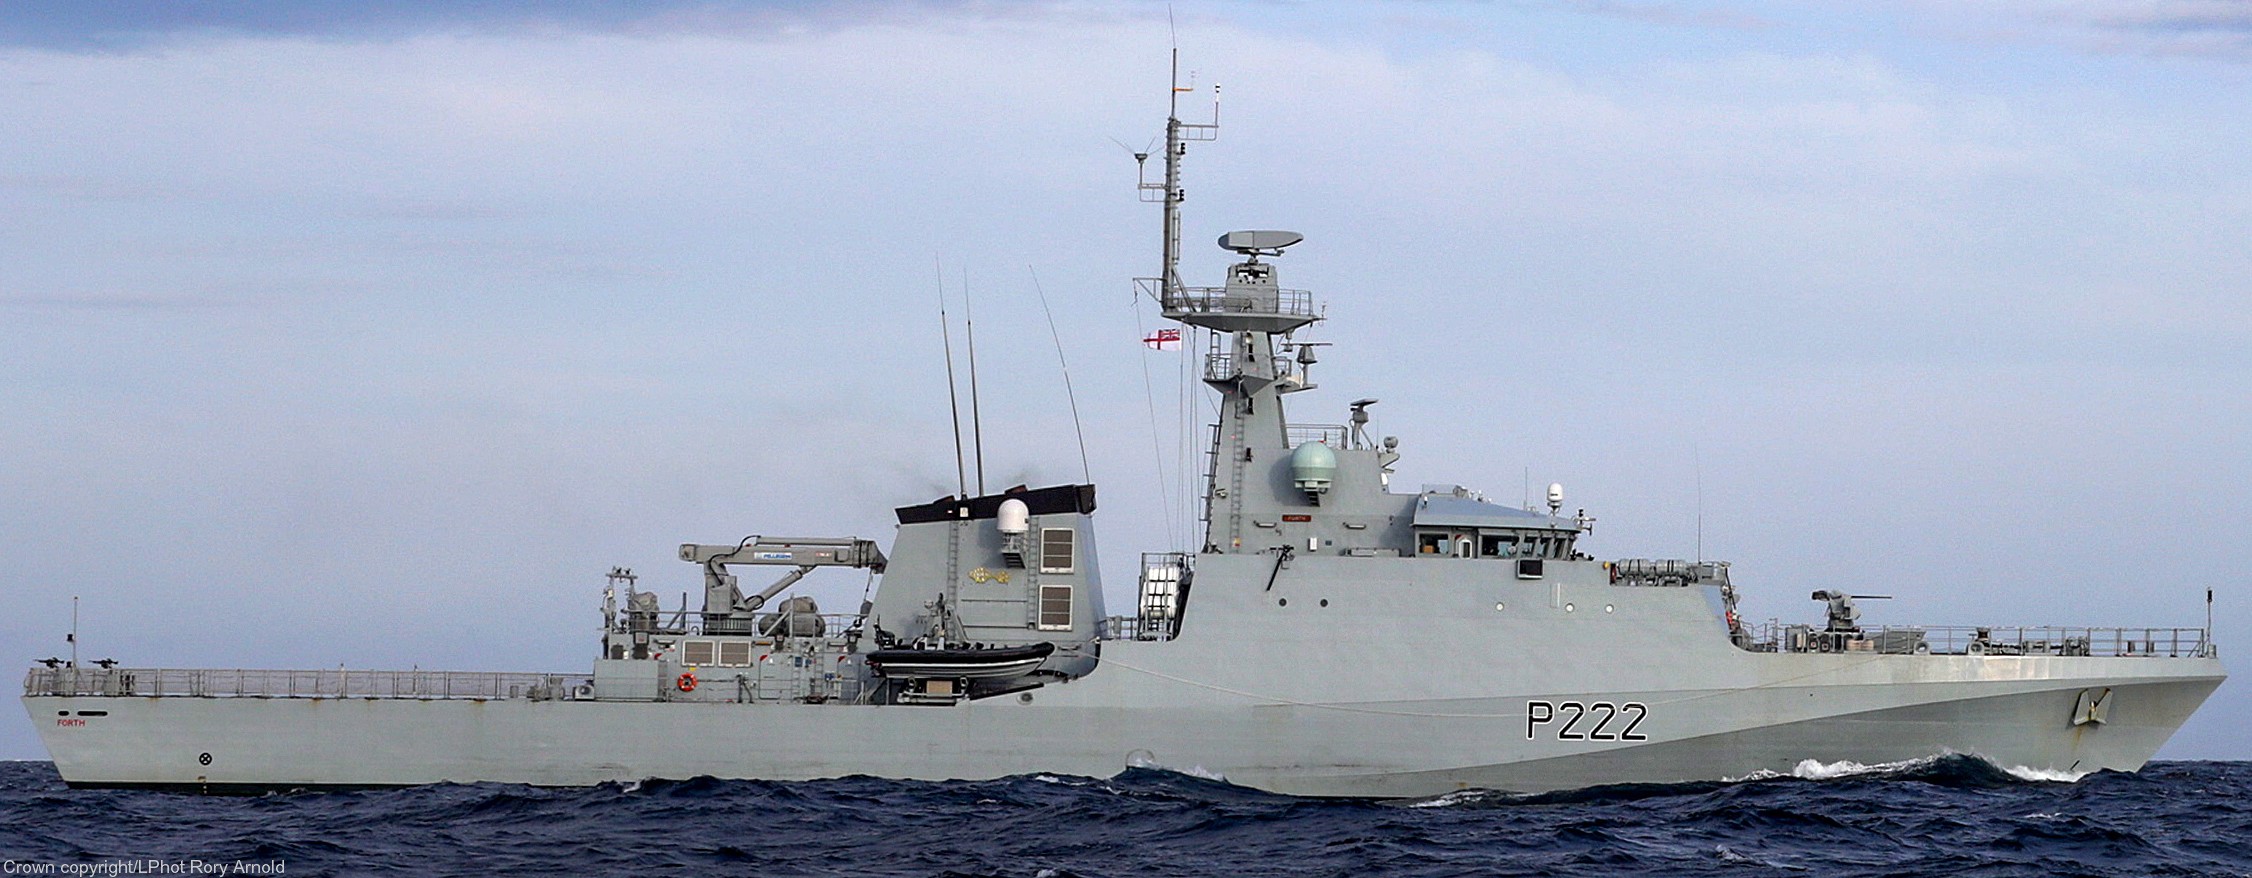 p-222 hms forth river class offshore patrol vessel opv royal navy 10